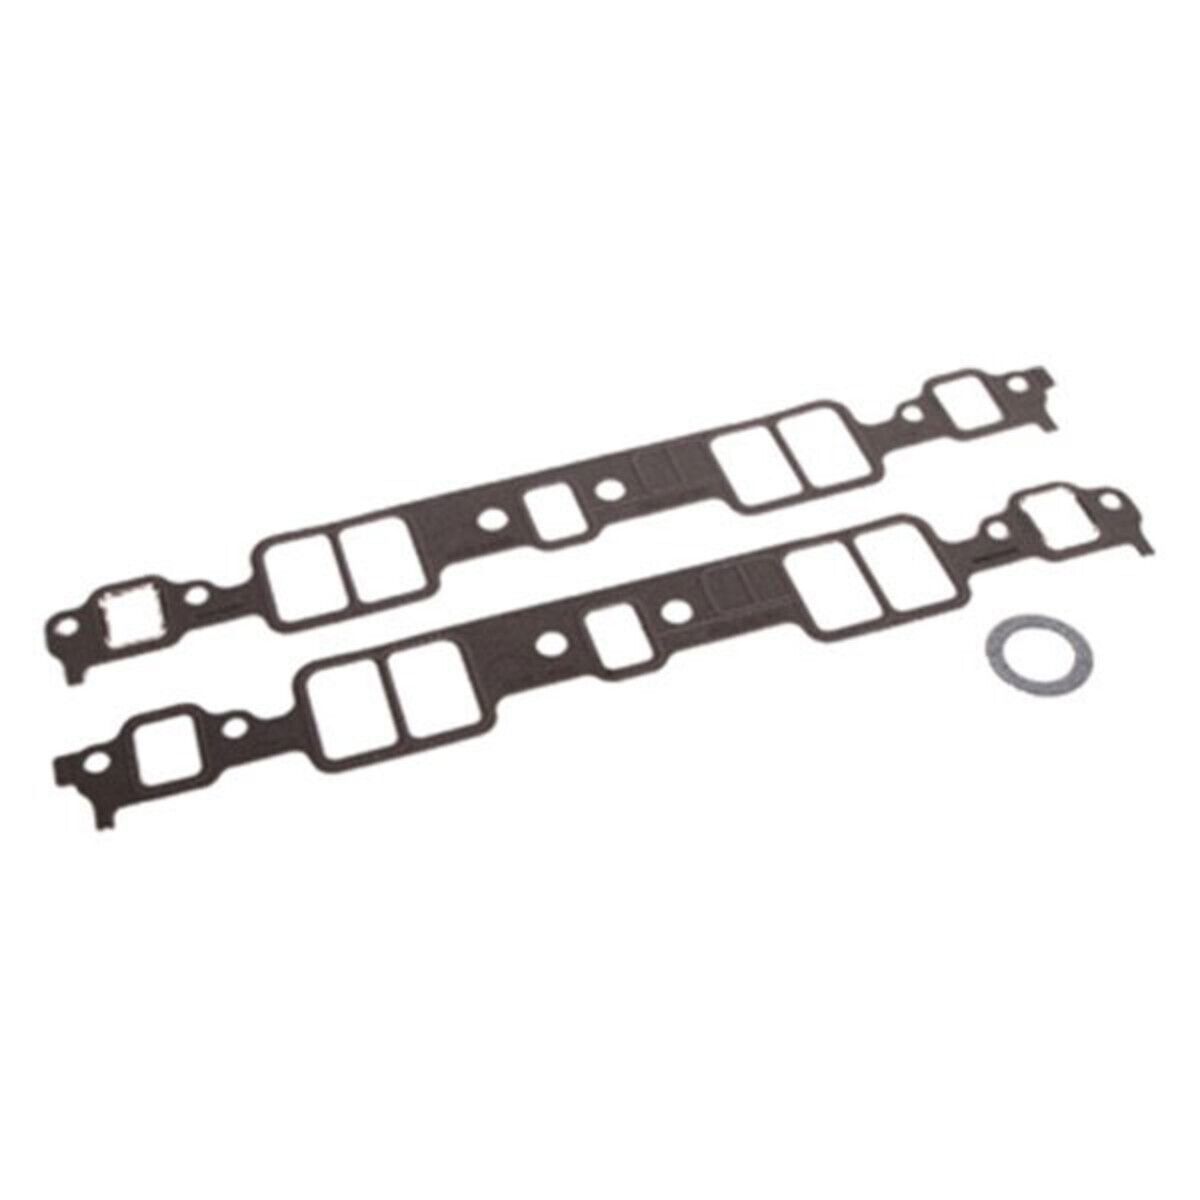 10159409 AC Delco Intake Manifold Gaskets Set for Chevy Express Van Suburban